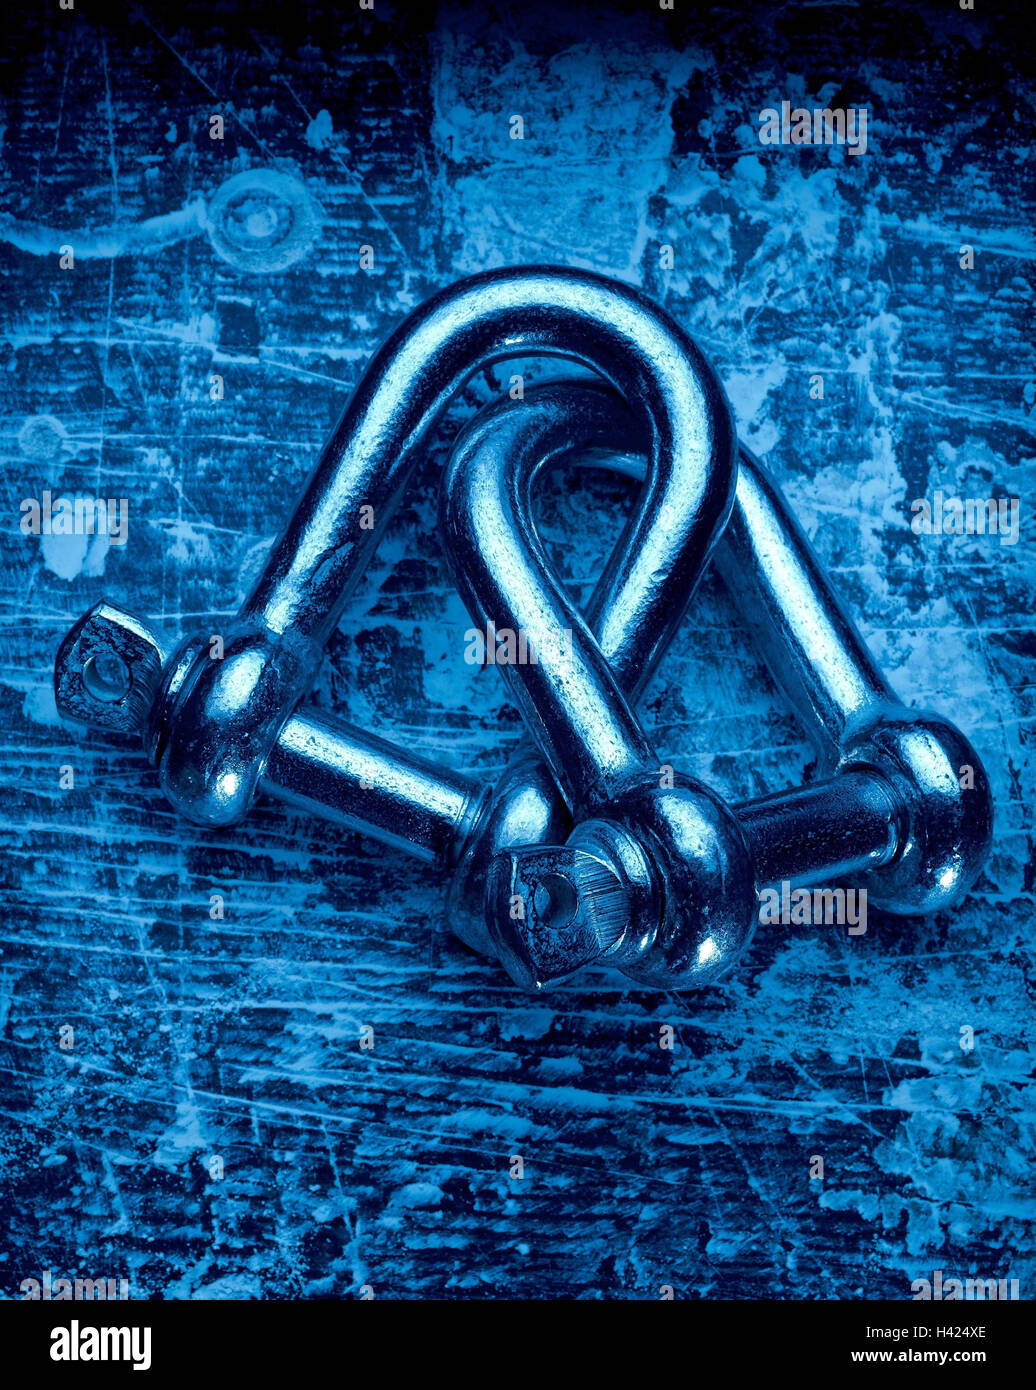 Tools, shackle, two, connection, Schraubbolzen, U-shaped, strap, sealable, metal, iron, connecting, fastening, plant, cohesion, fastening, product photography, Still life, blue Stock Photo